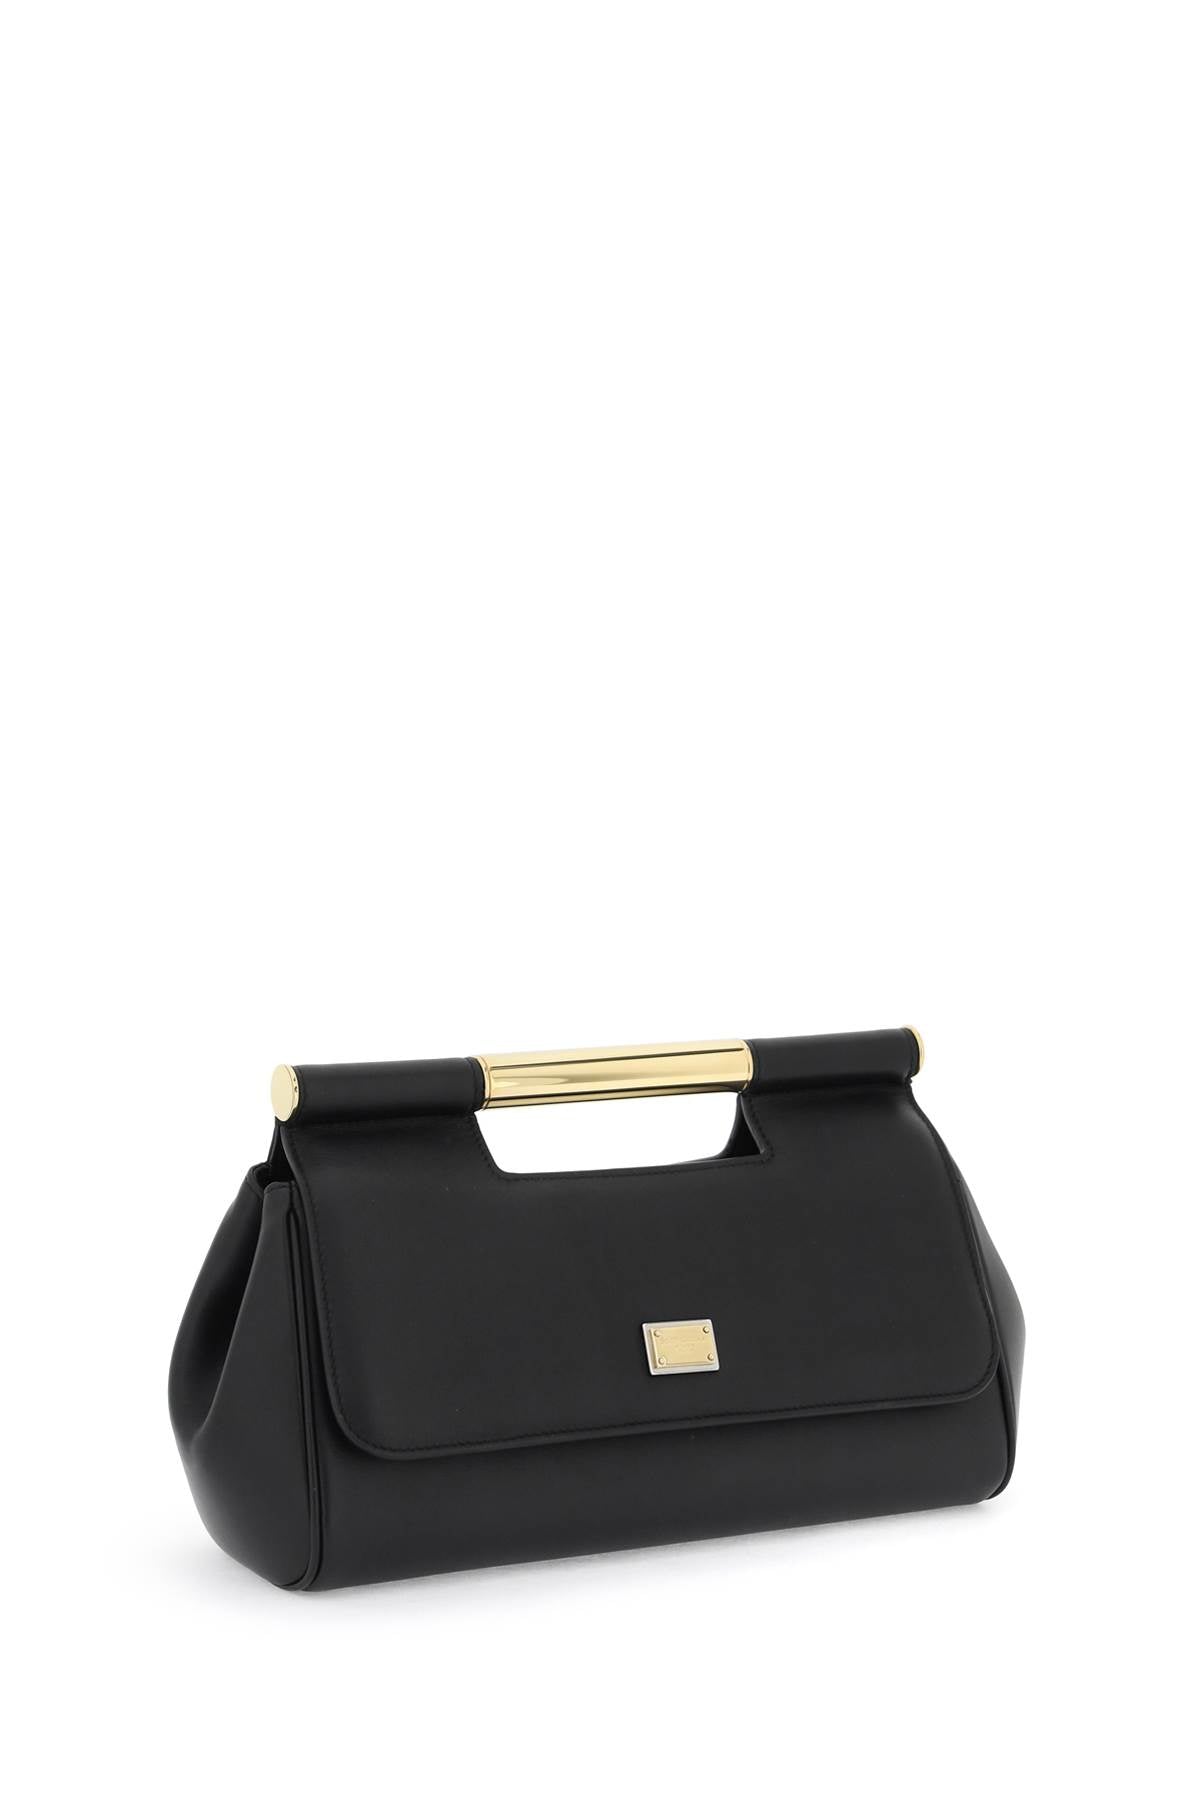 DOLCE & GABBANA Sicily Clutch in Black Leather - SS24 Collection